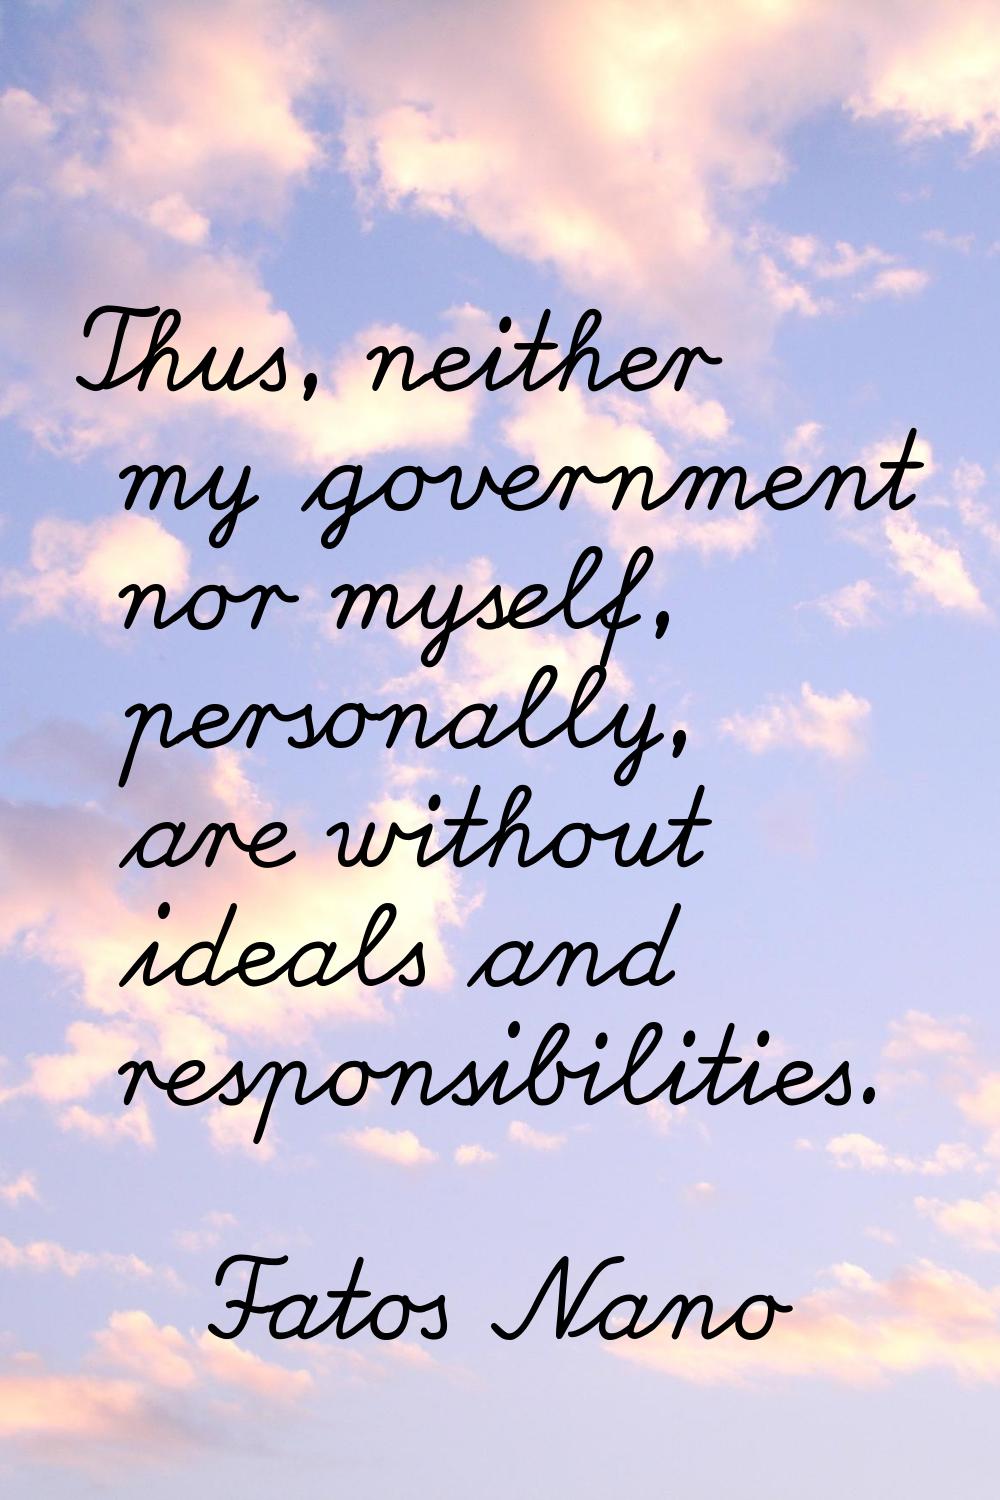 Thus, neither my government nor myself, personally, are without ideals and responsibilities.